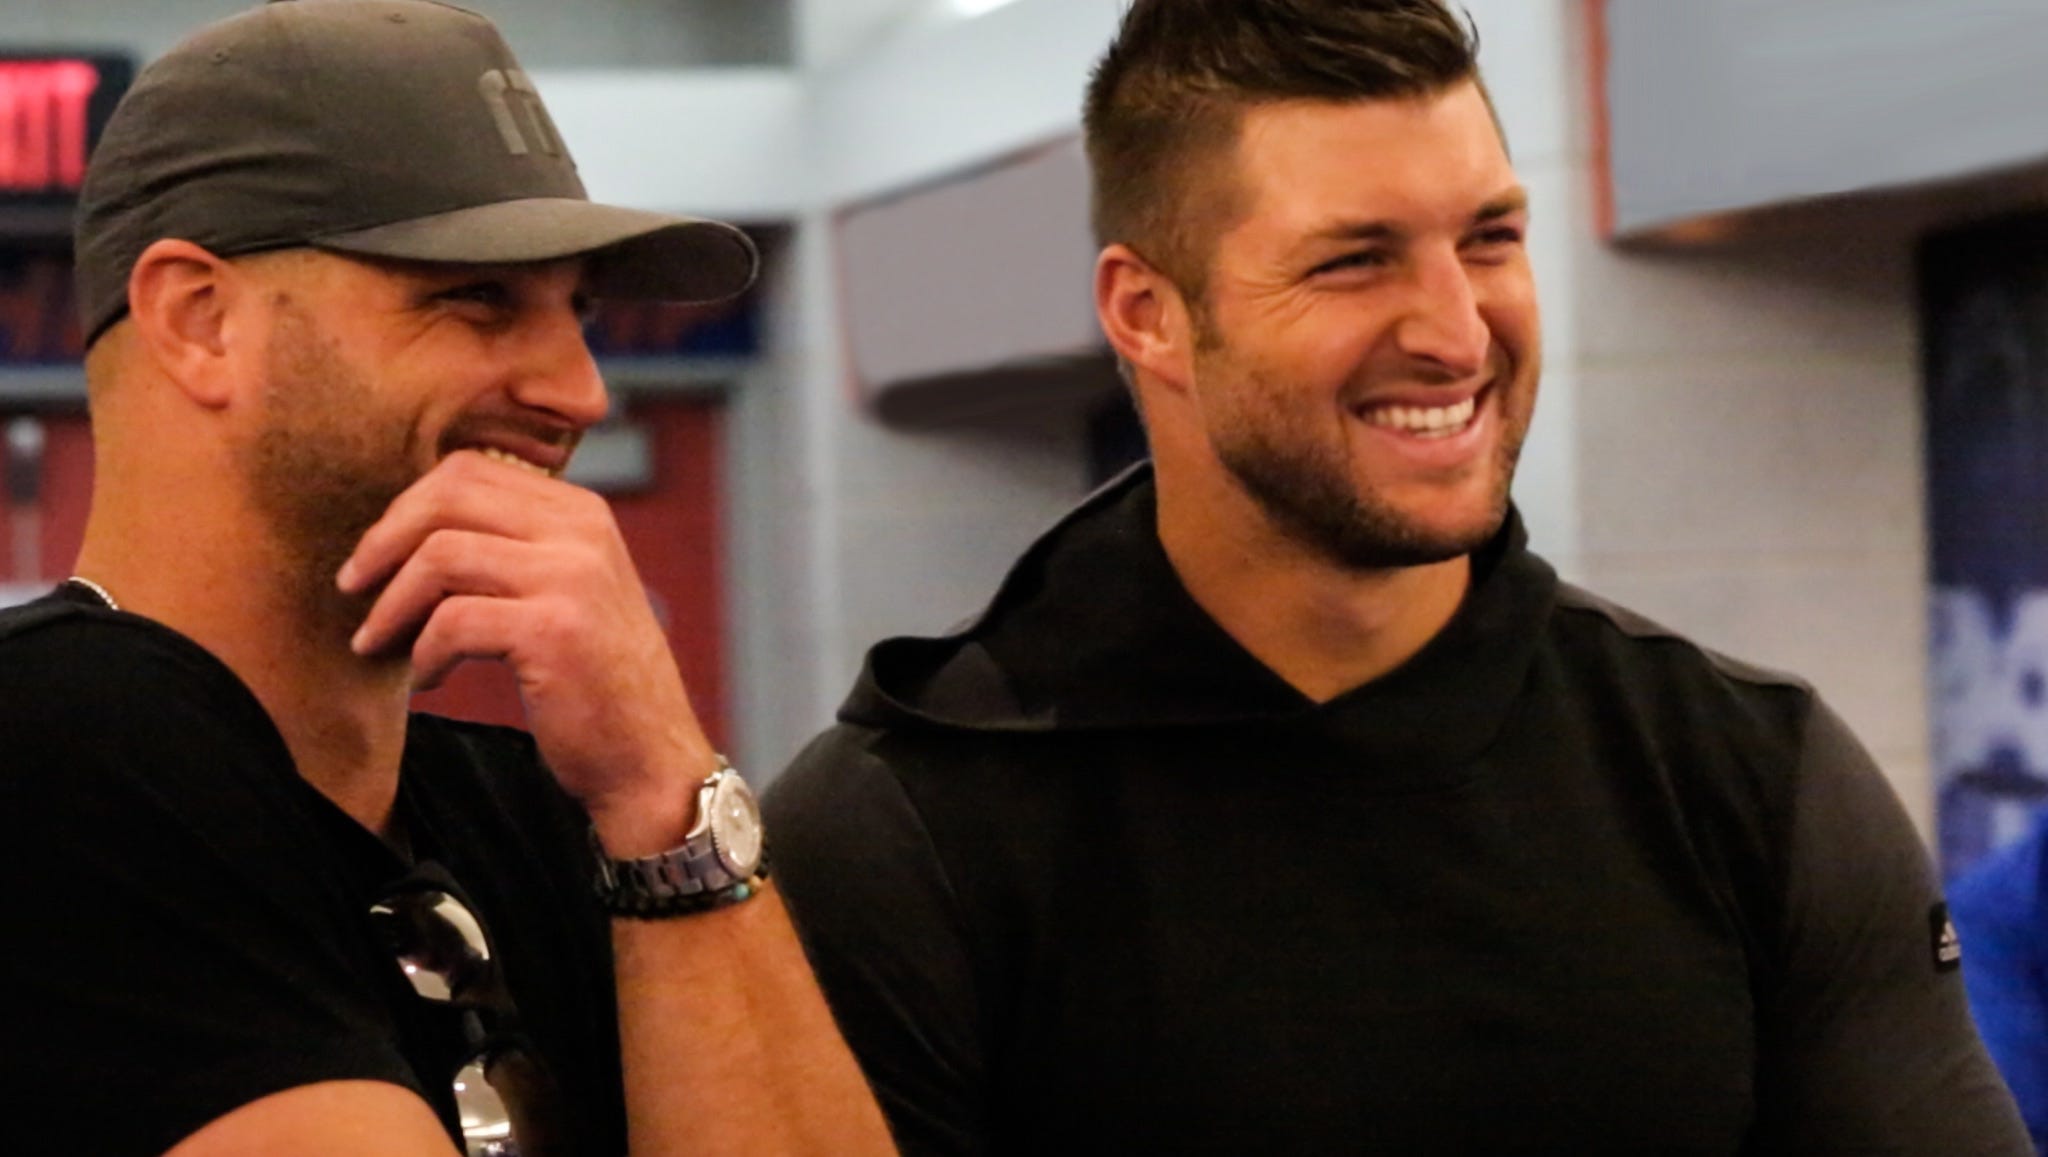 Tim Tebow: 27 real answers you have never heard before